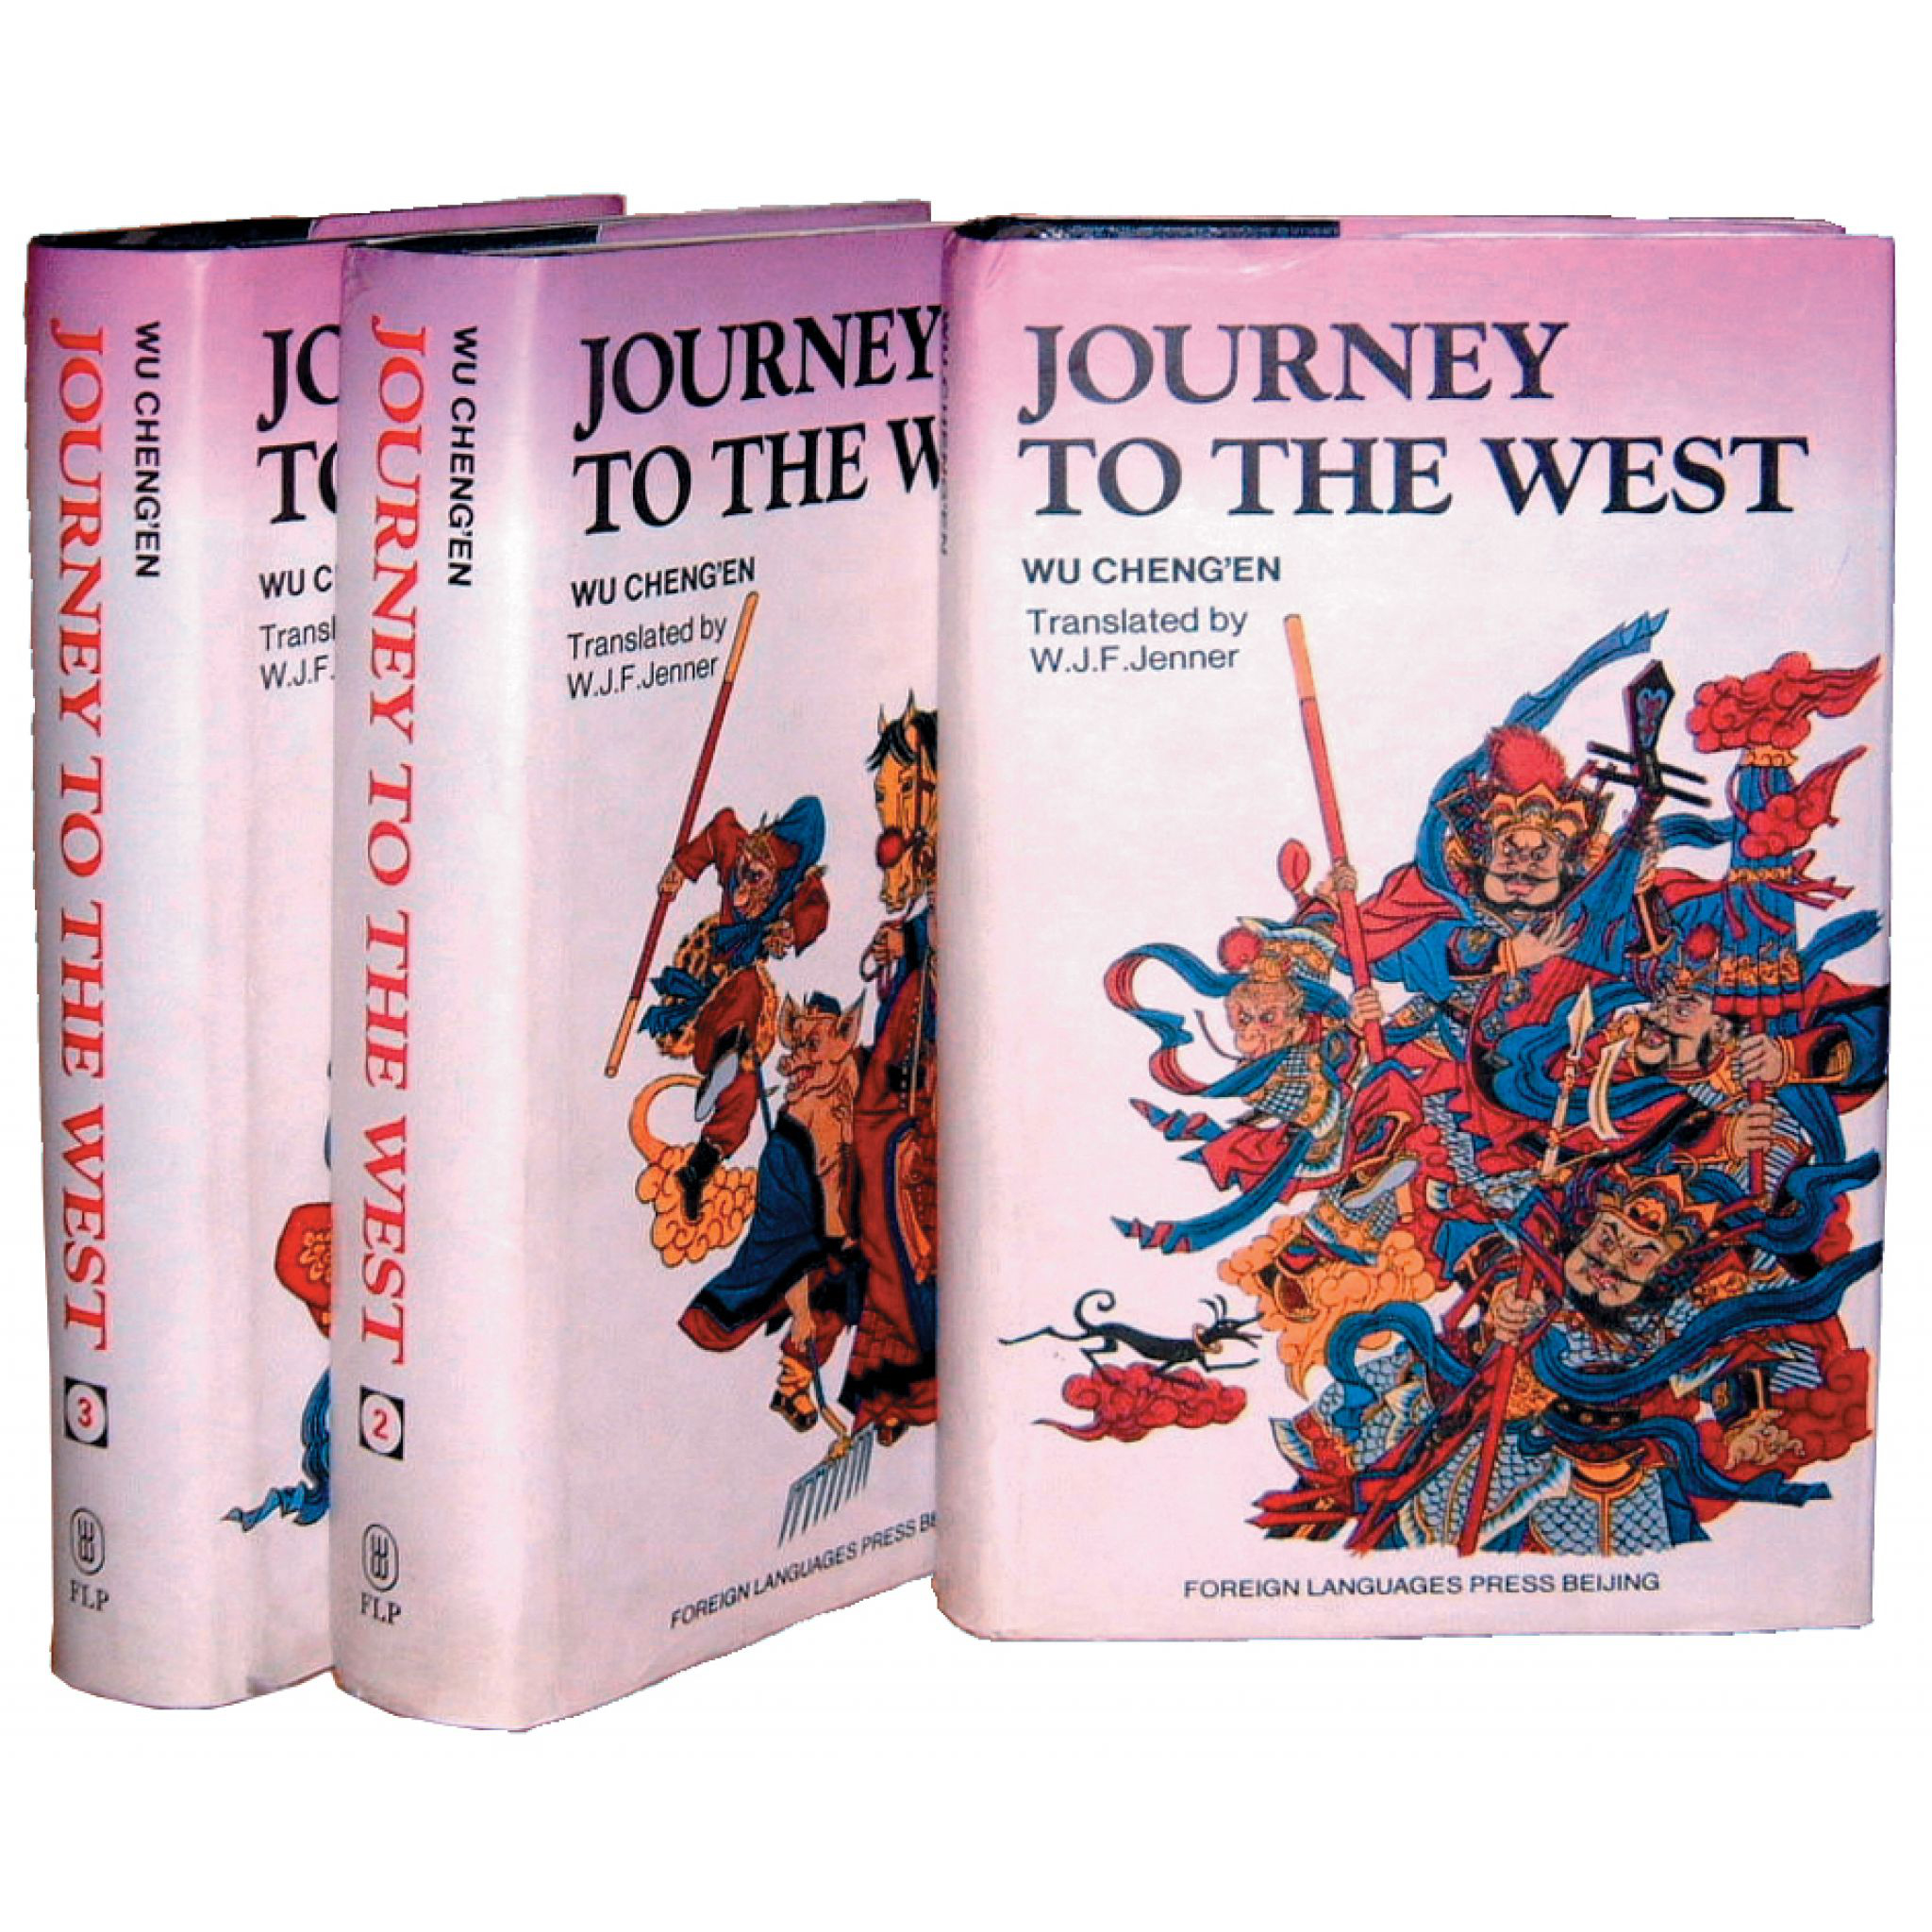 Journey to the West Book Coverd.jpg